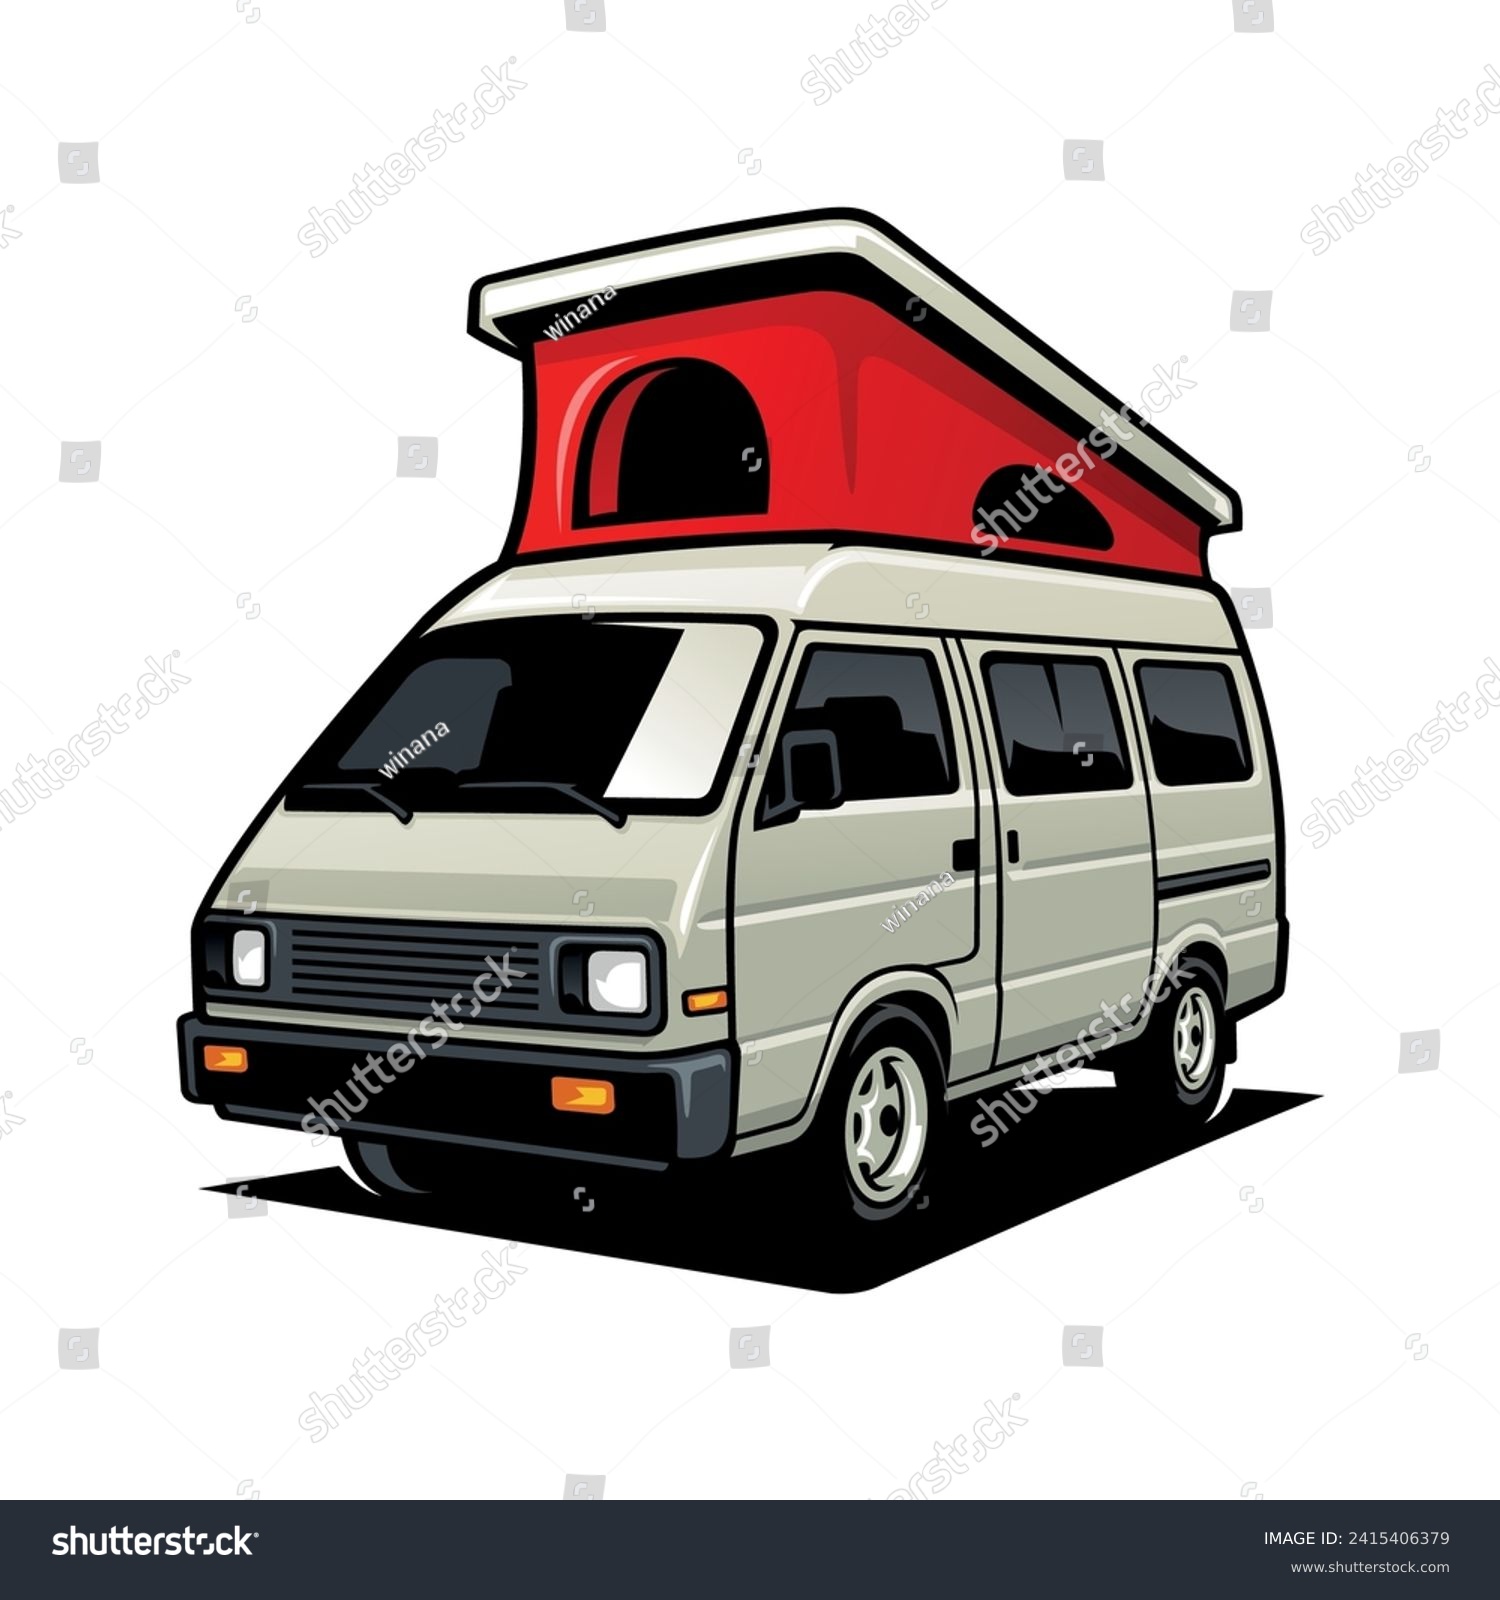 SVG of camping car with roof tent illustration vector svg